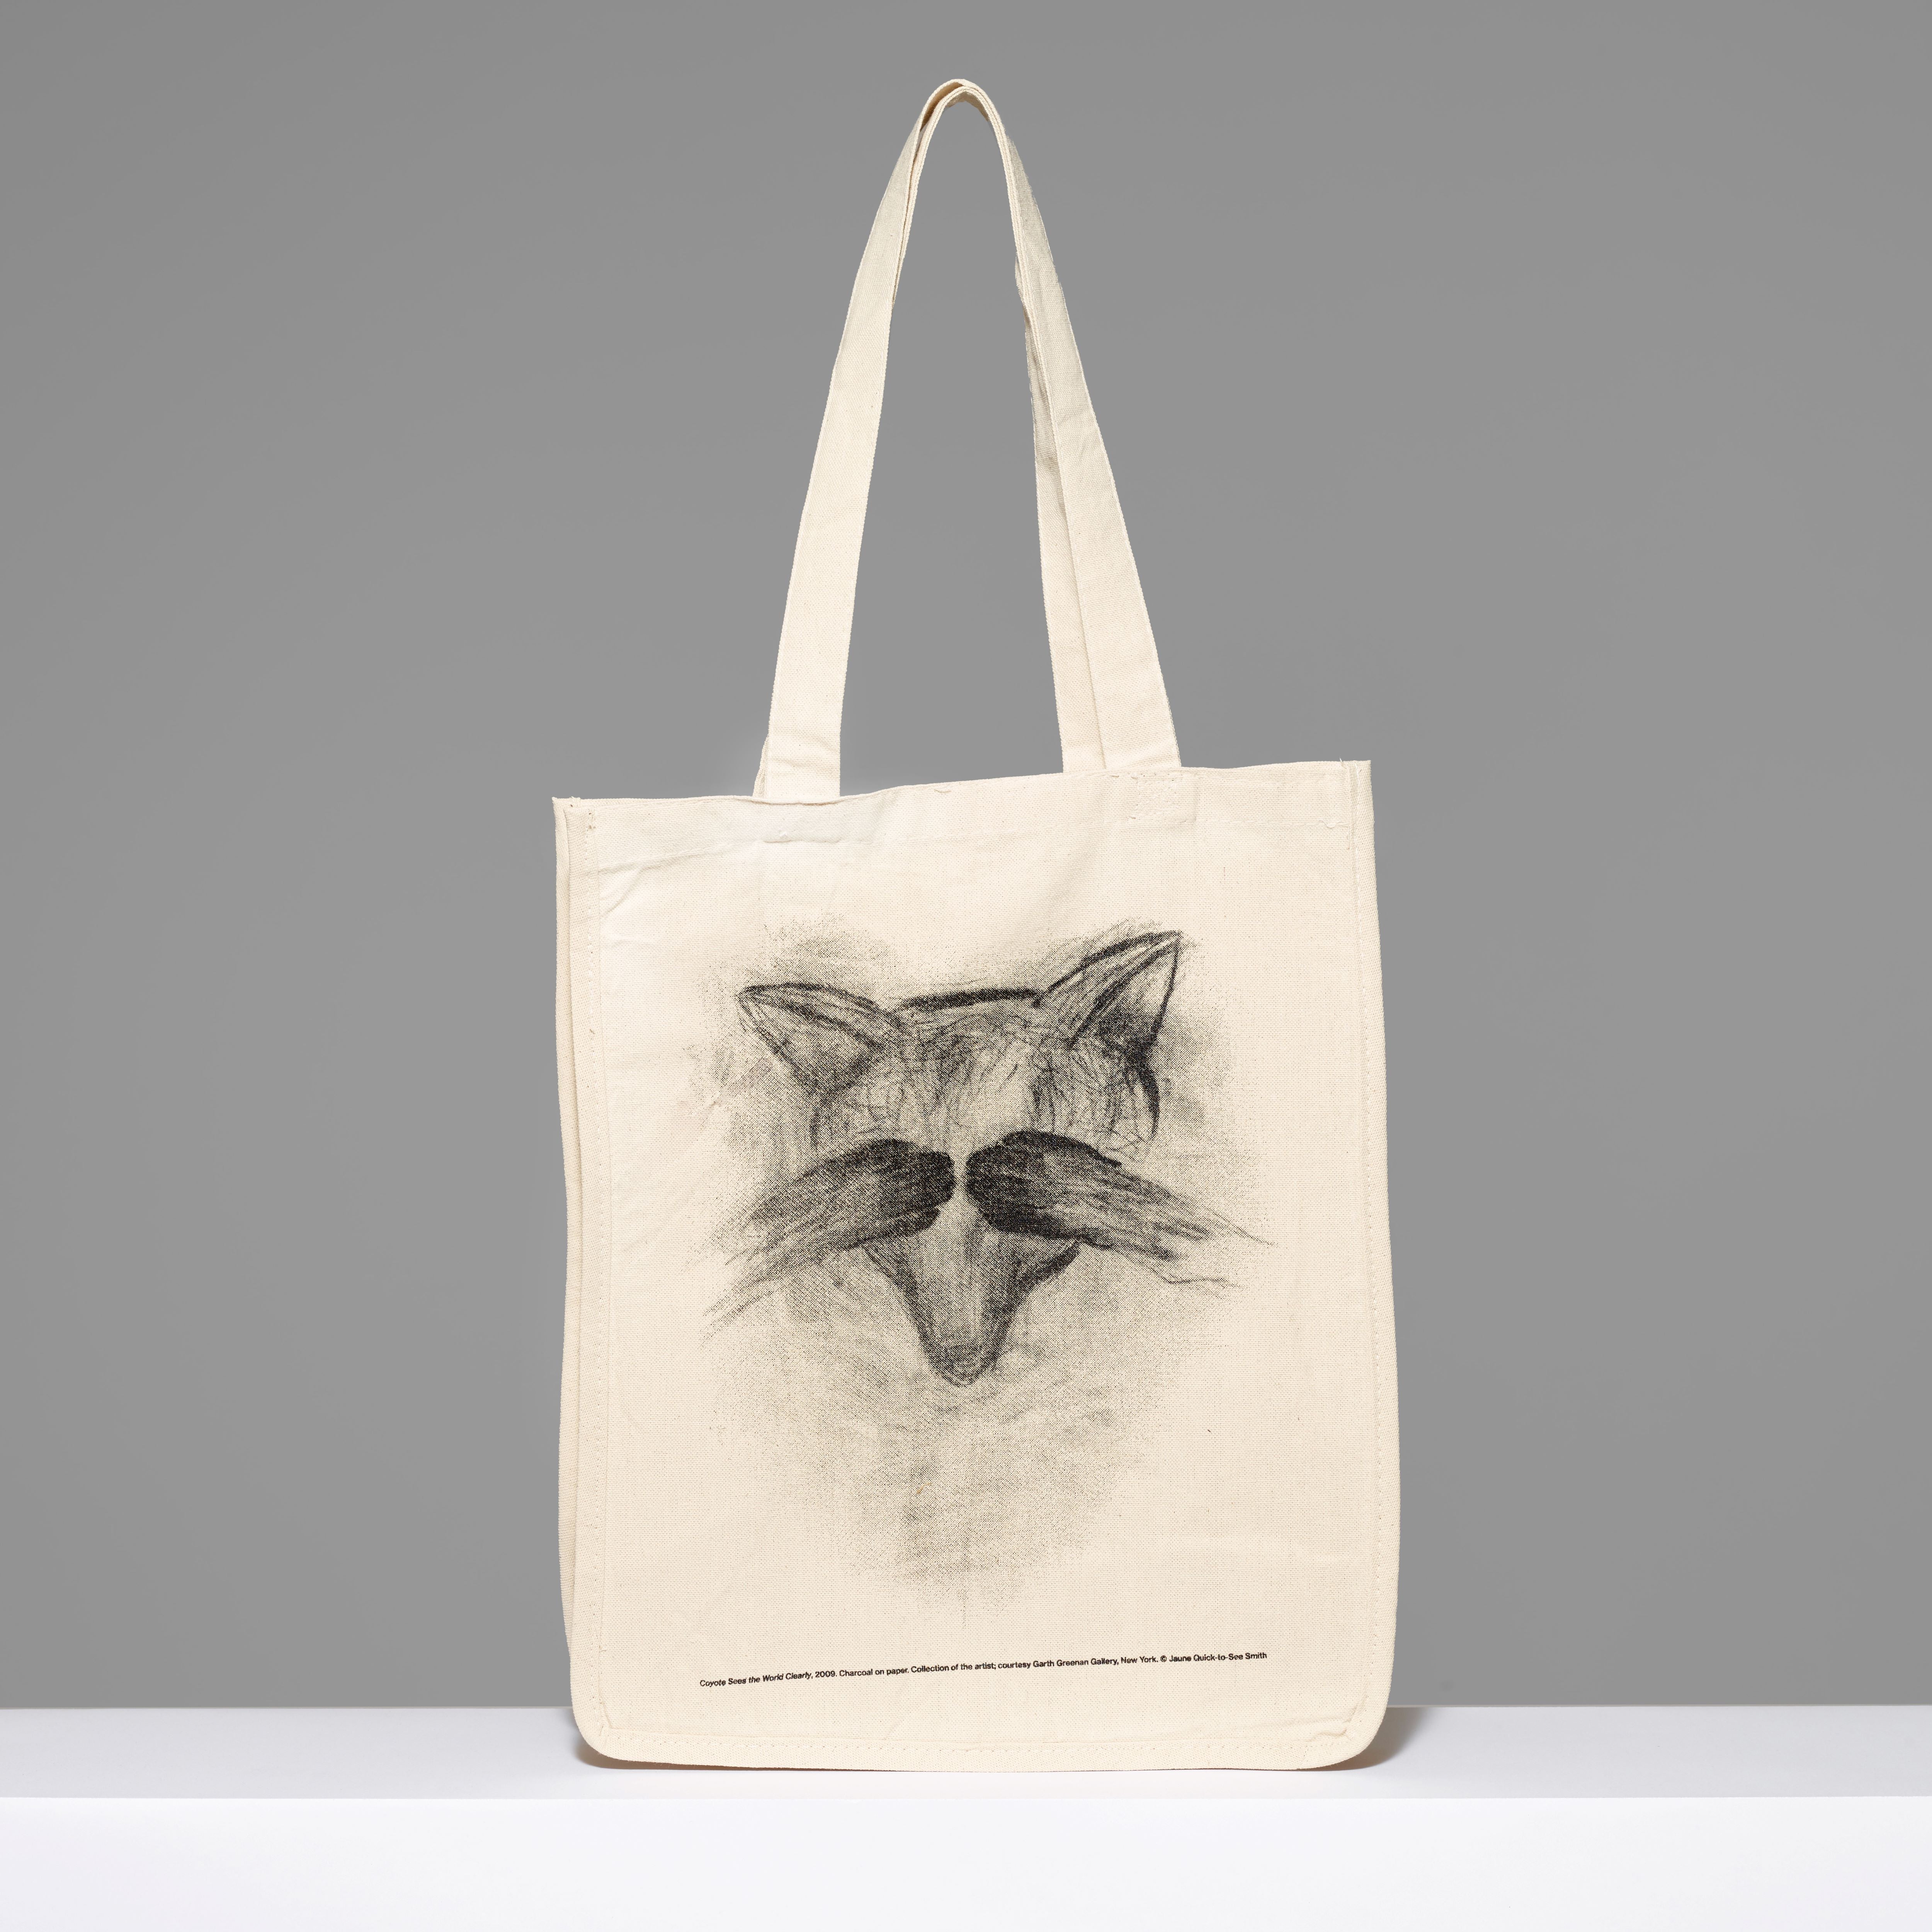 100% cotton canvas tote featuring Jaune Quick-to-See Smith Coyote See the World Clearly. Measures 17" H x 14" L x 7" W